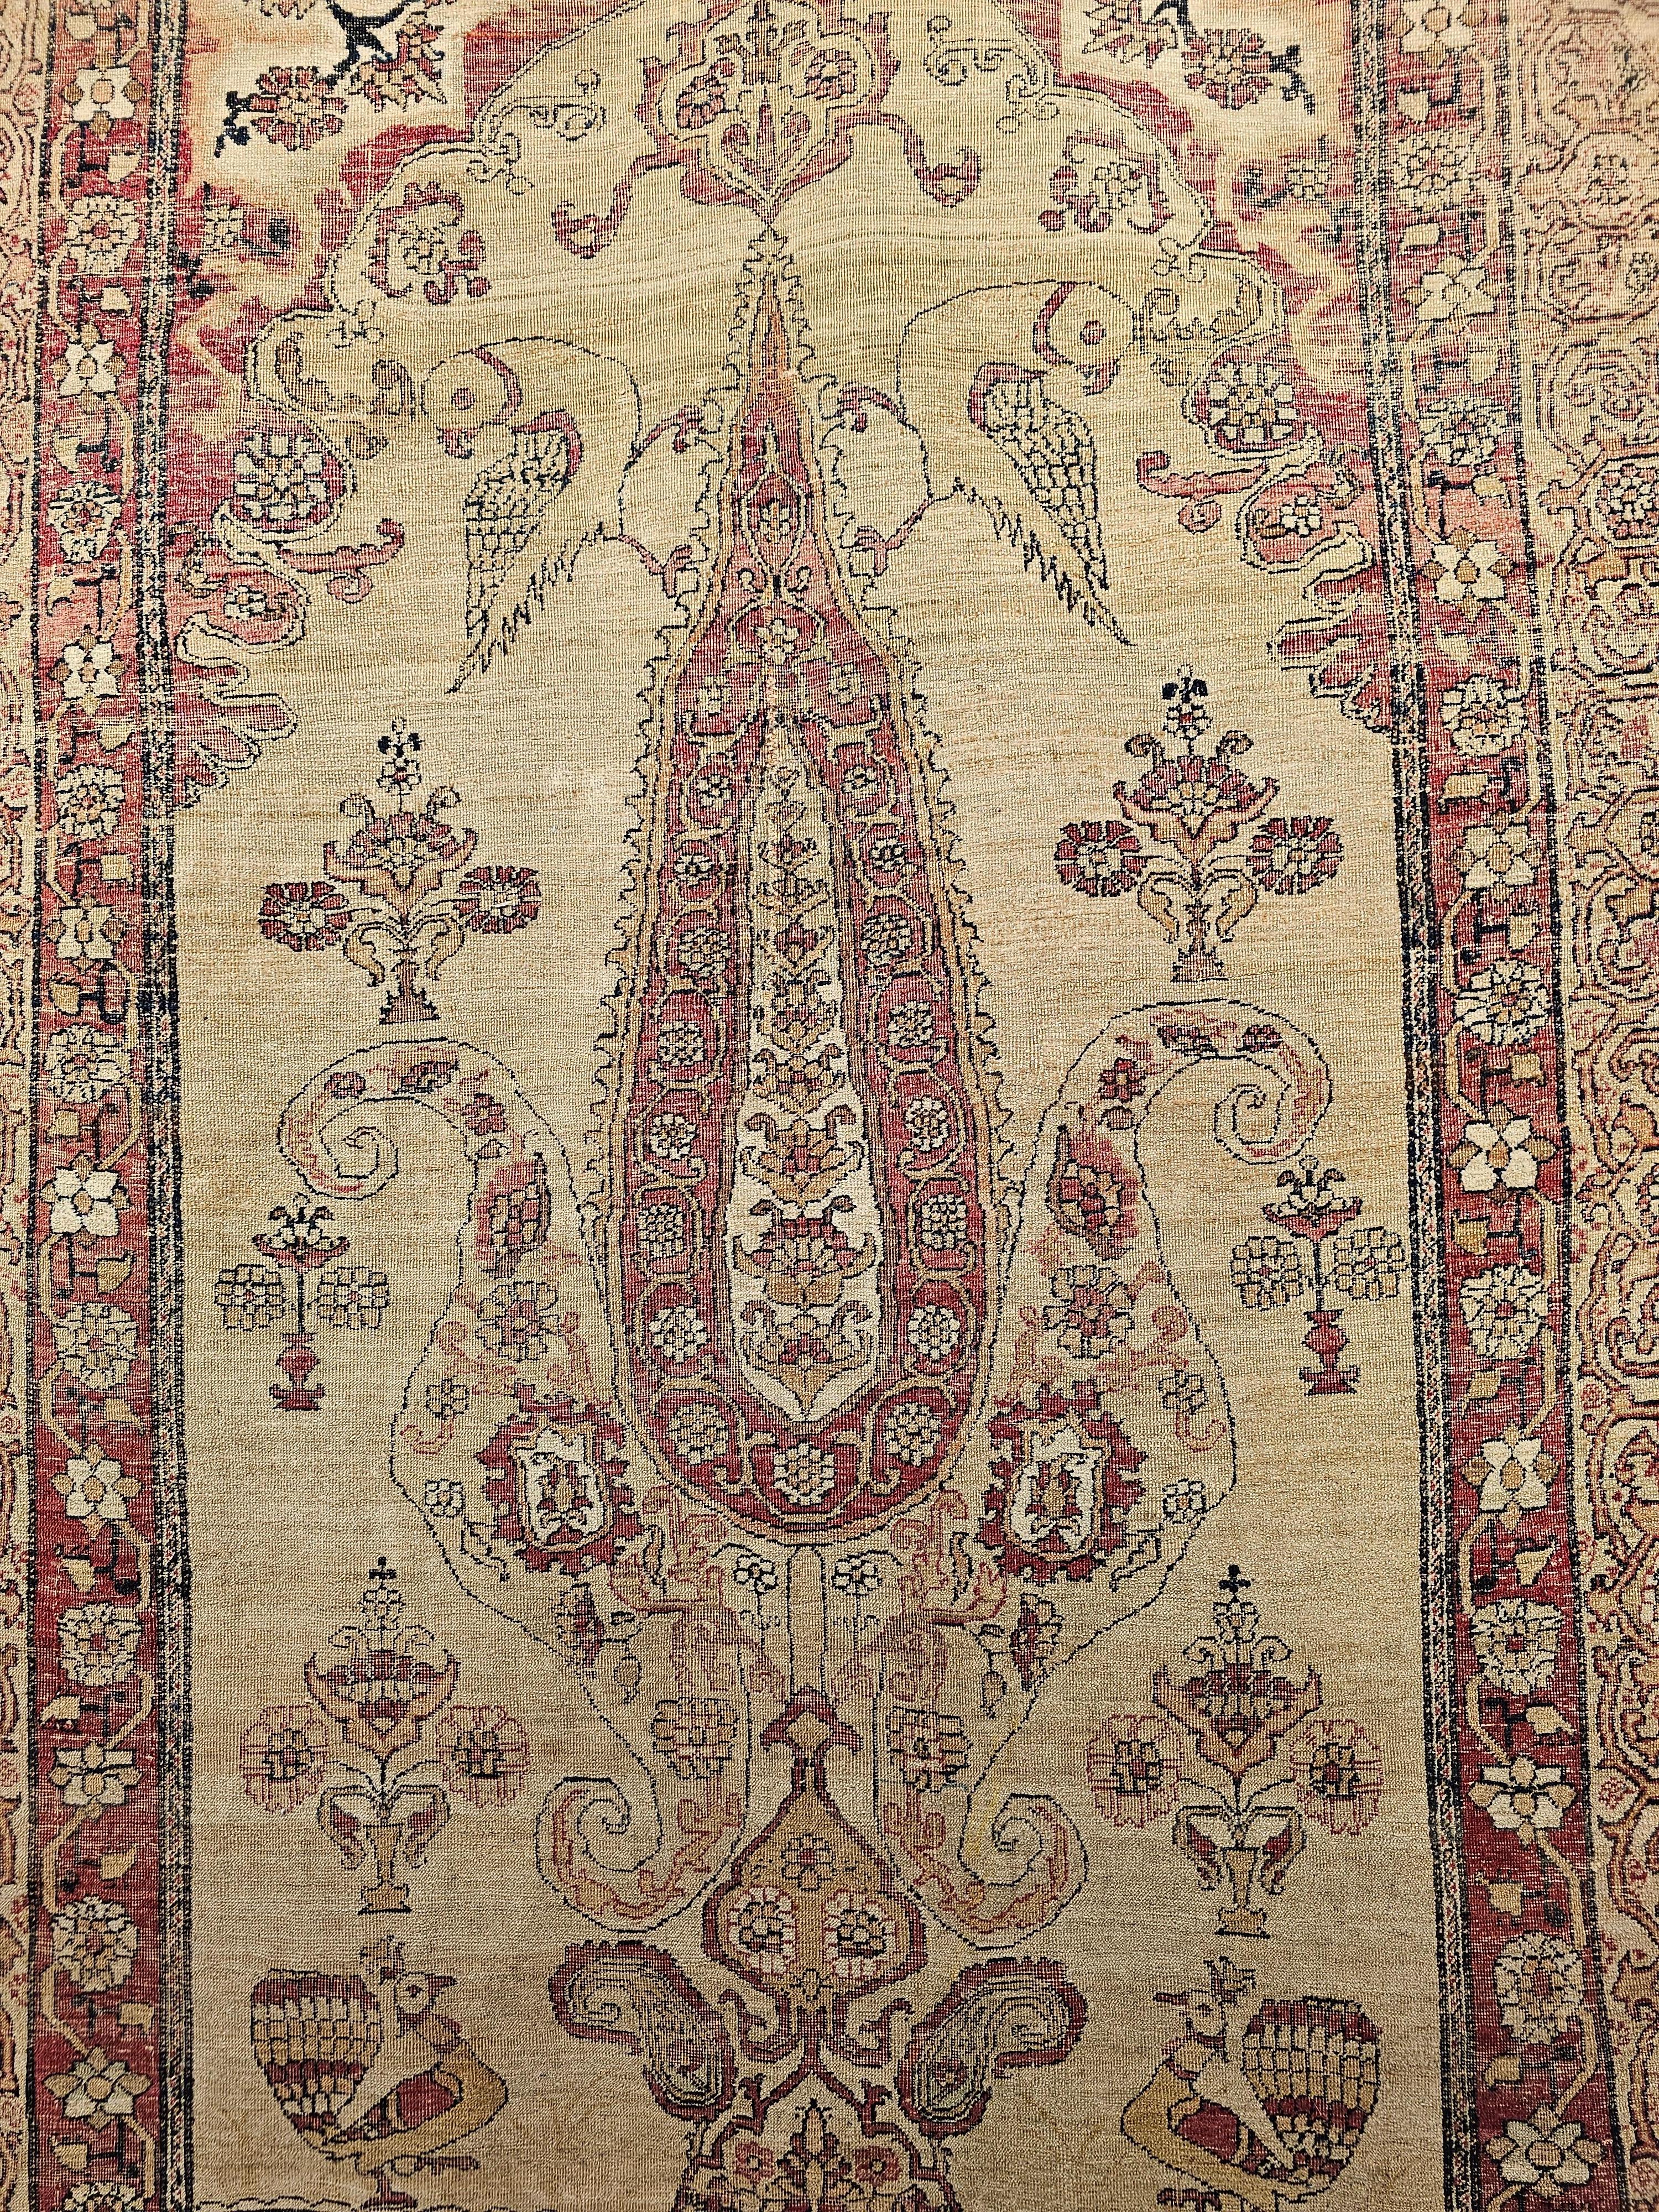 Vegetable Dyed 19th Century Persian Kerman Lavar Pictorial “Tree of Life” Rug in Camel, Red For Sale